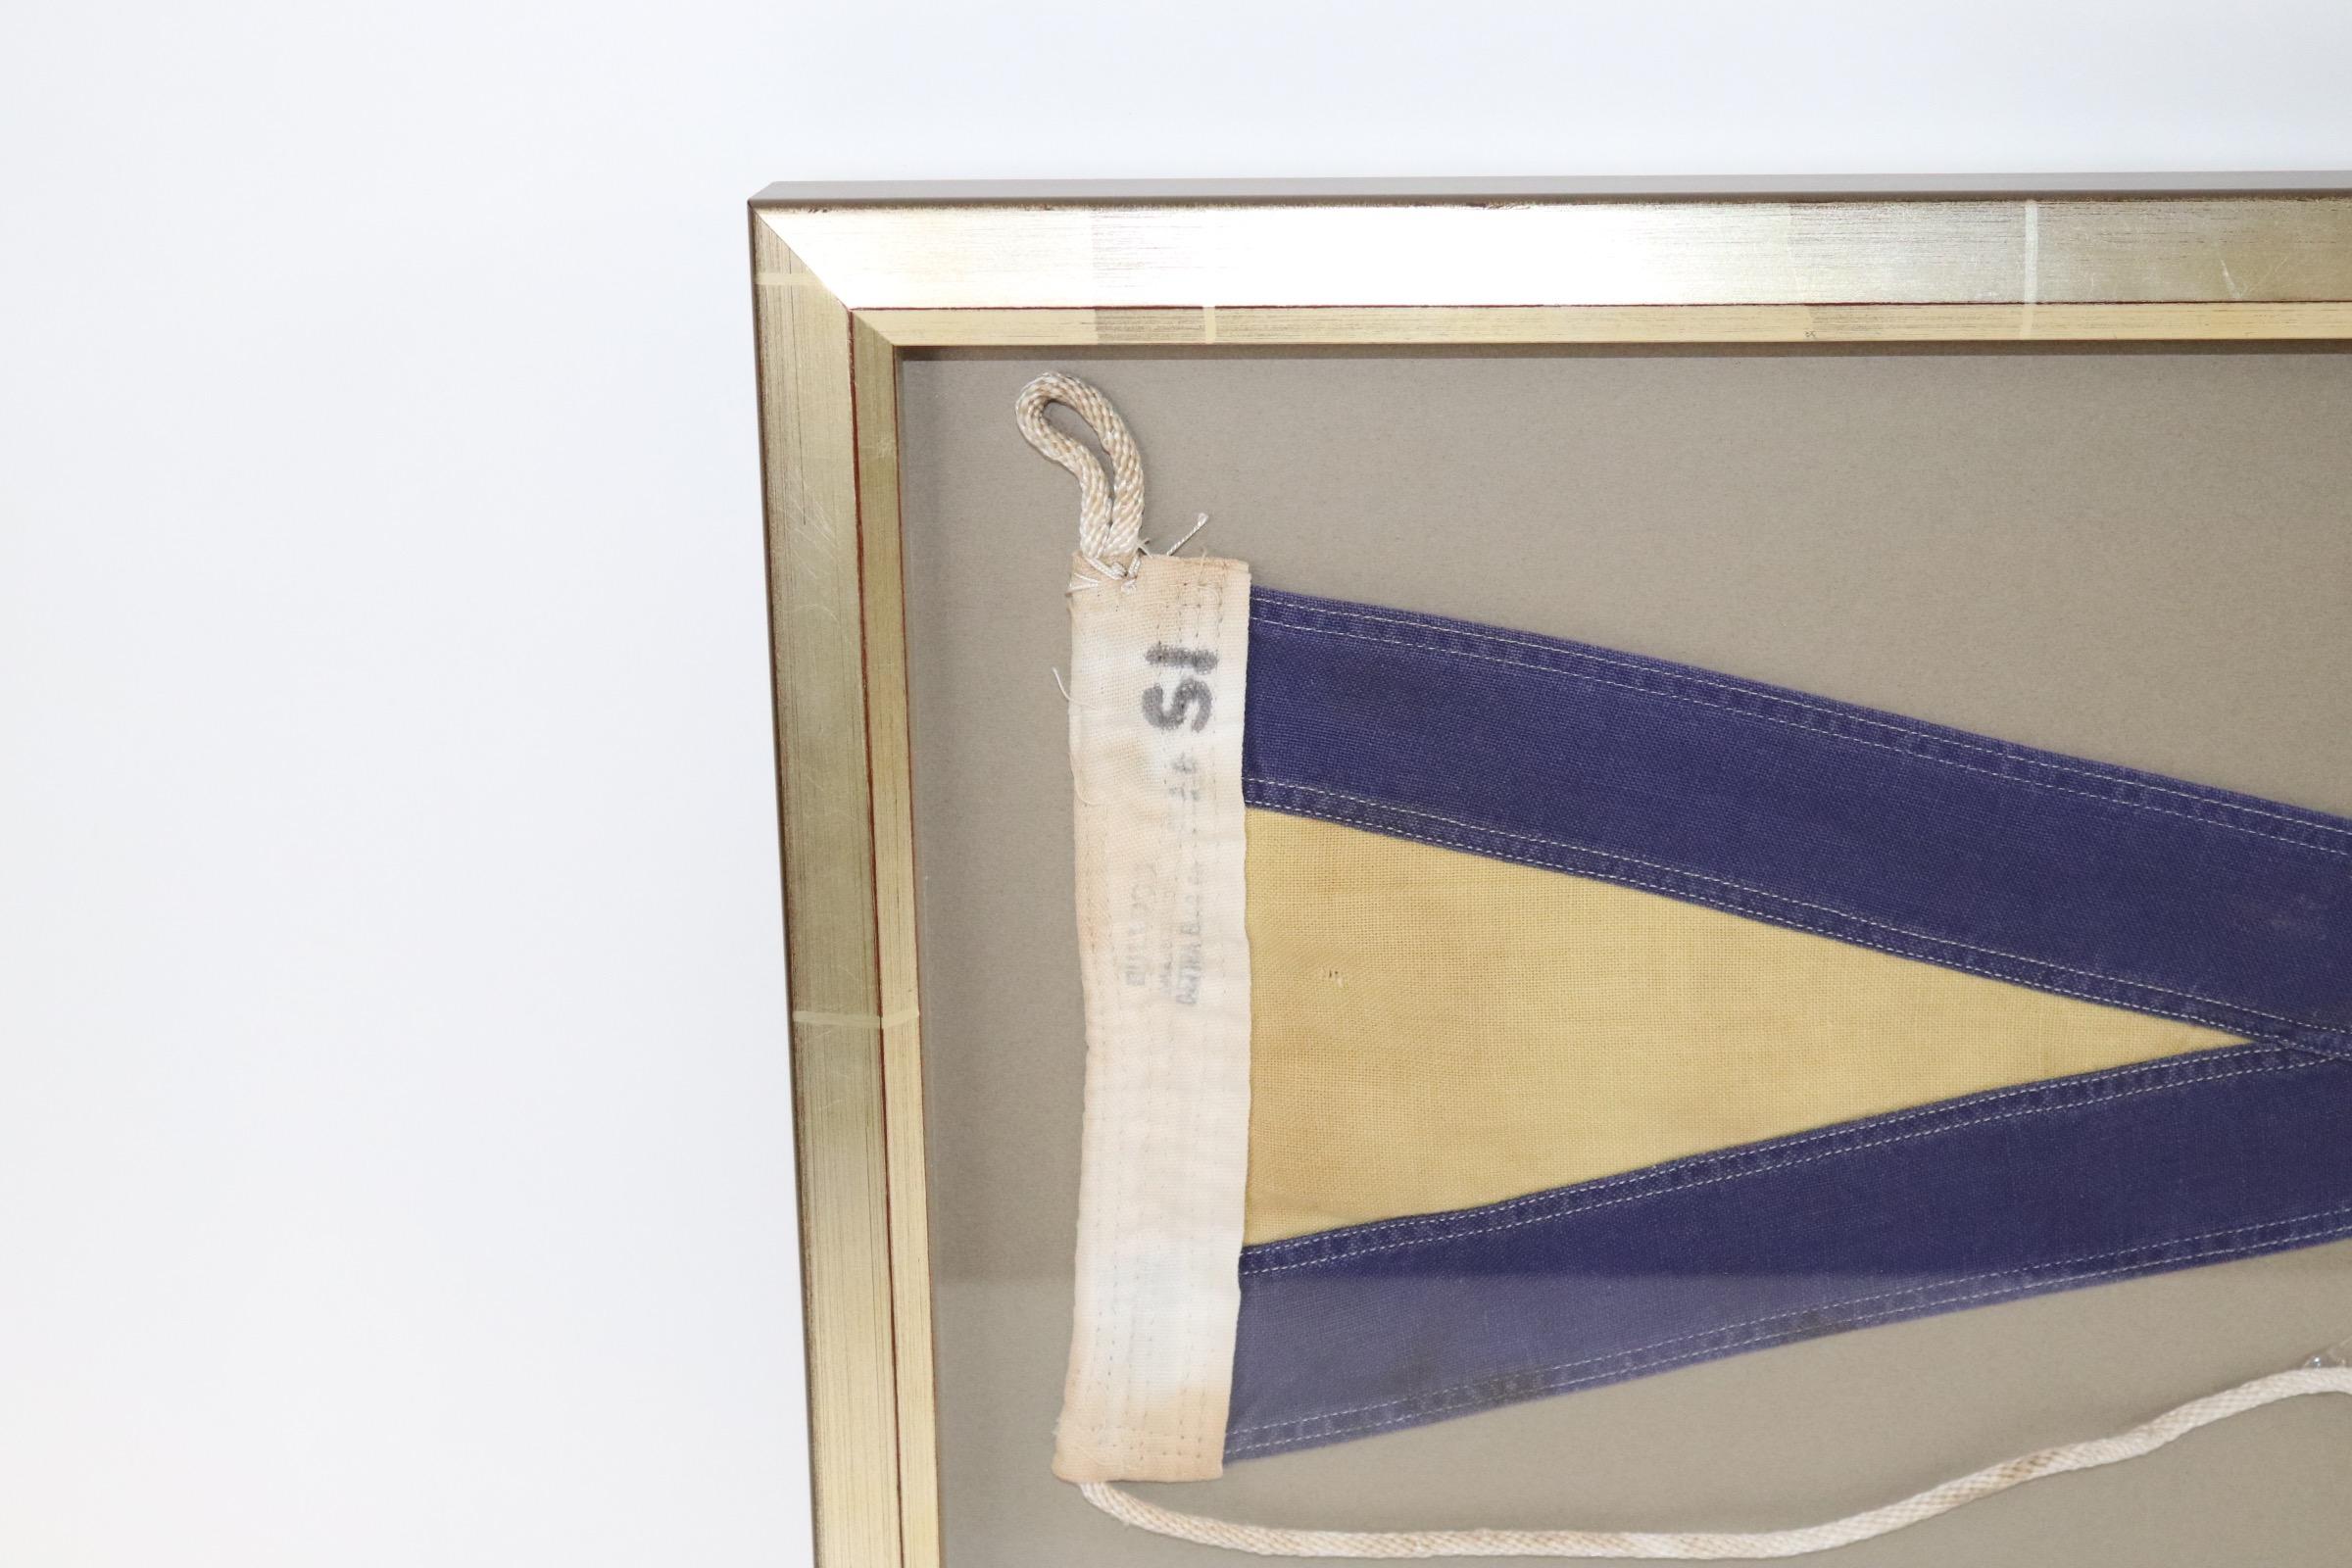 Shadow box framed ships signal flag with attached rope and wood toggle. Blue field with yellow. Weight is 5 pounds.